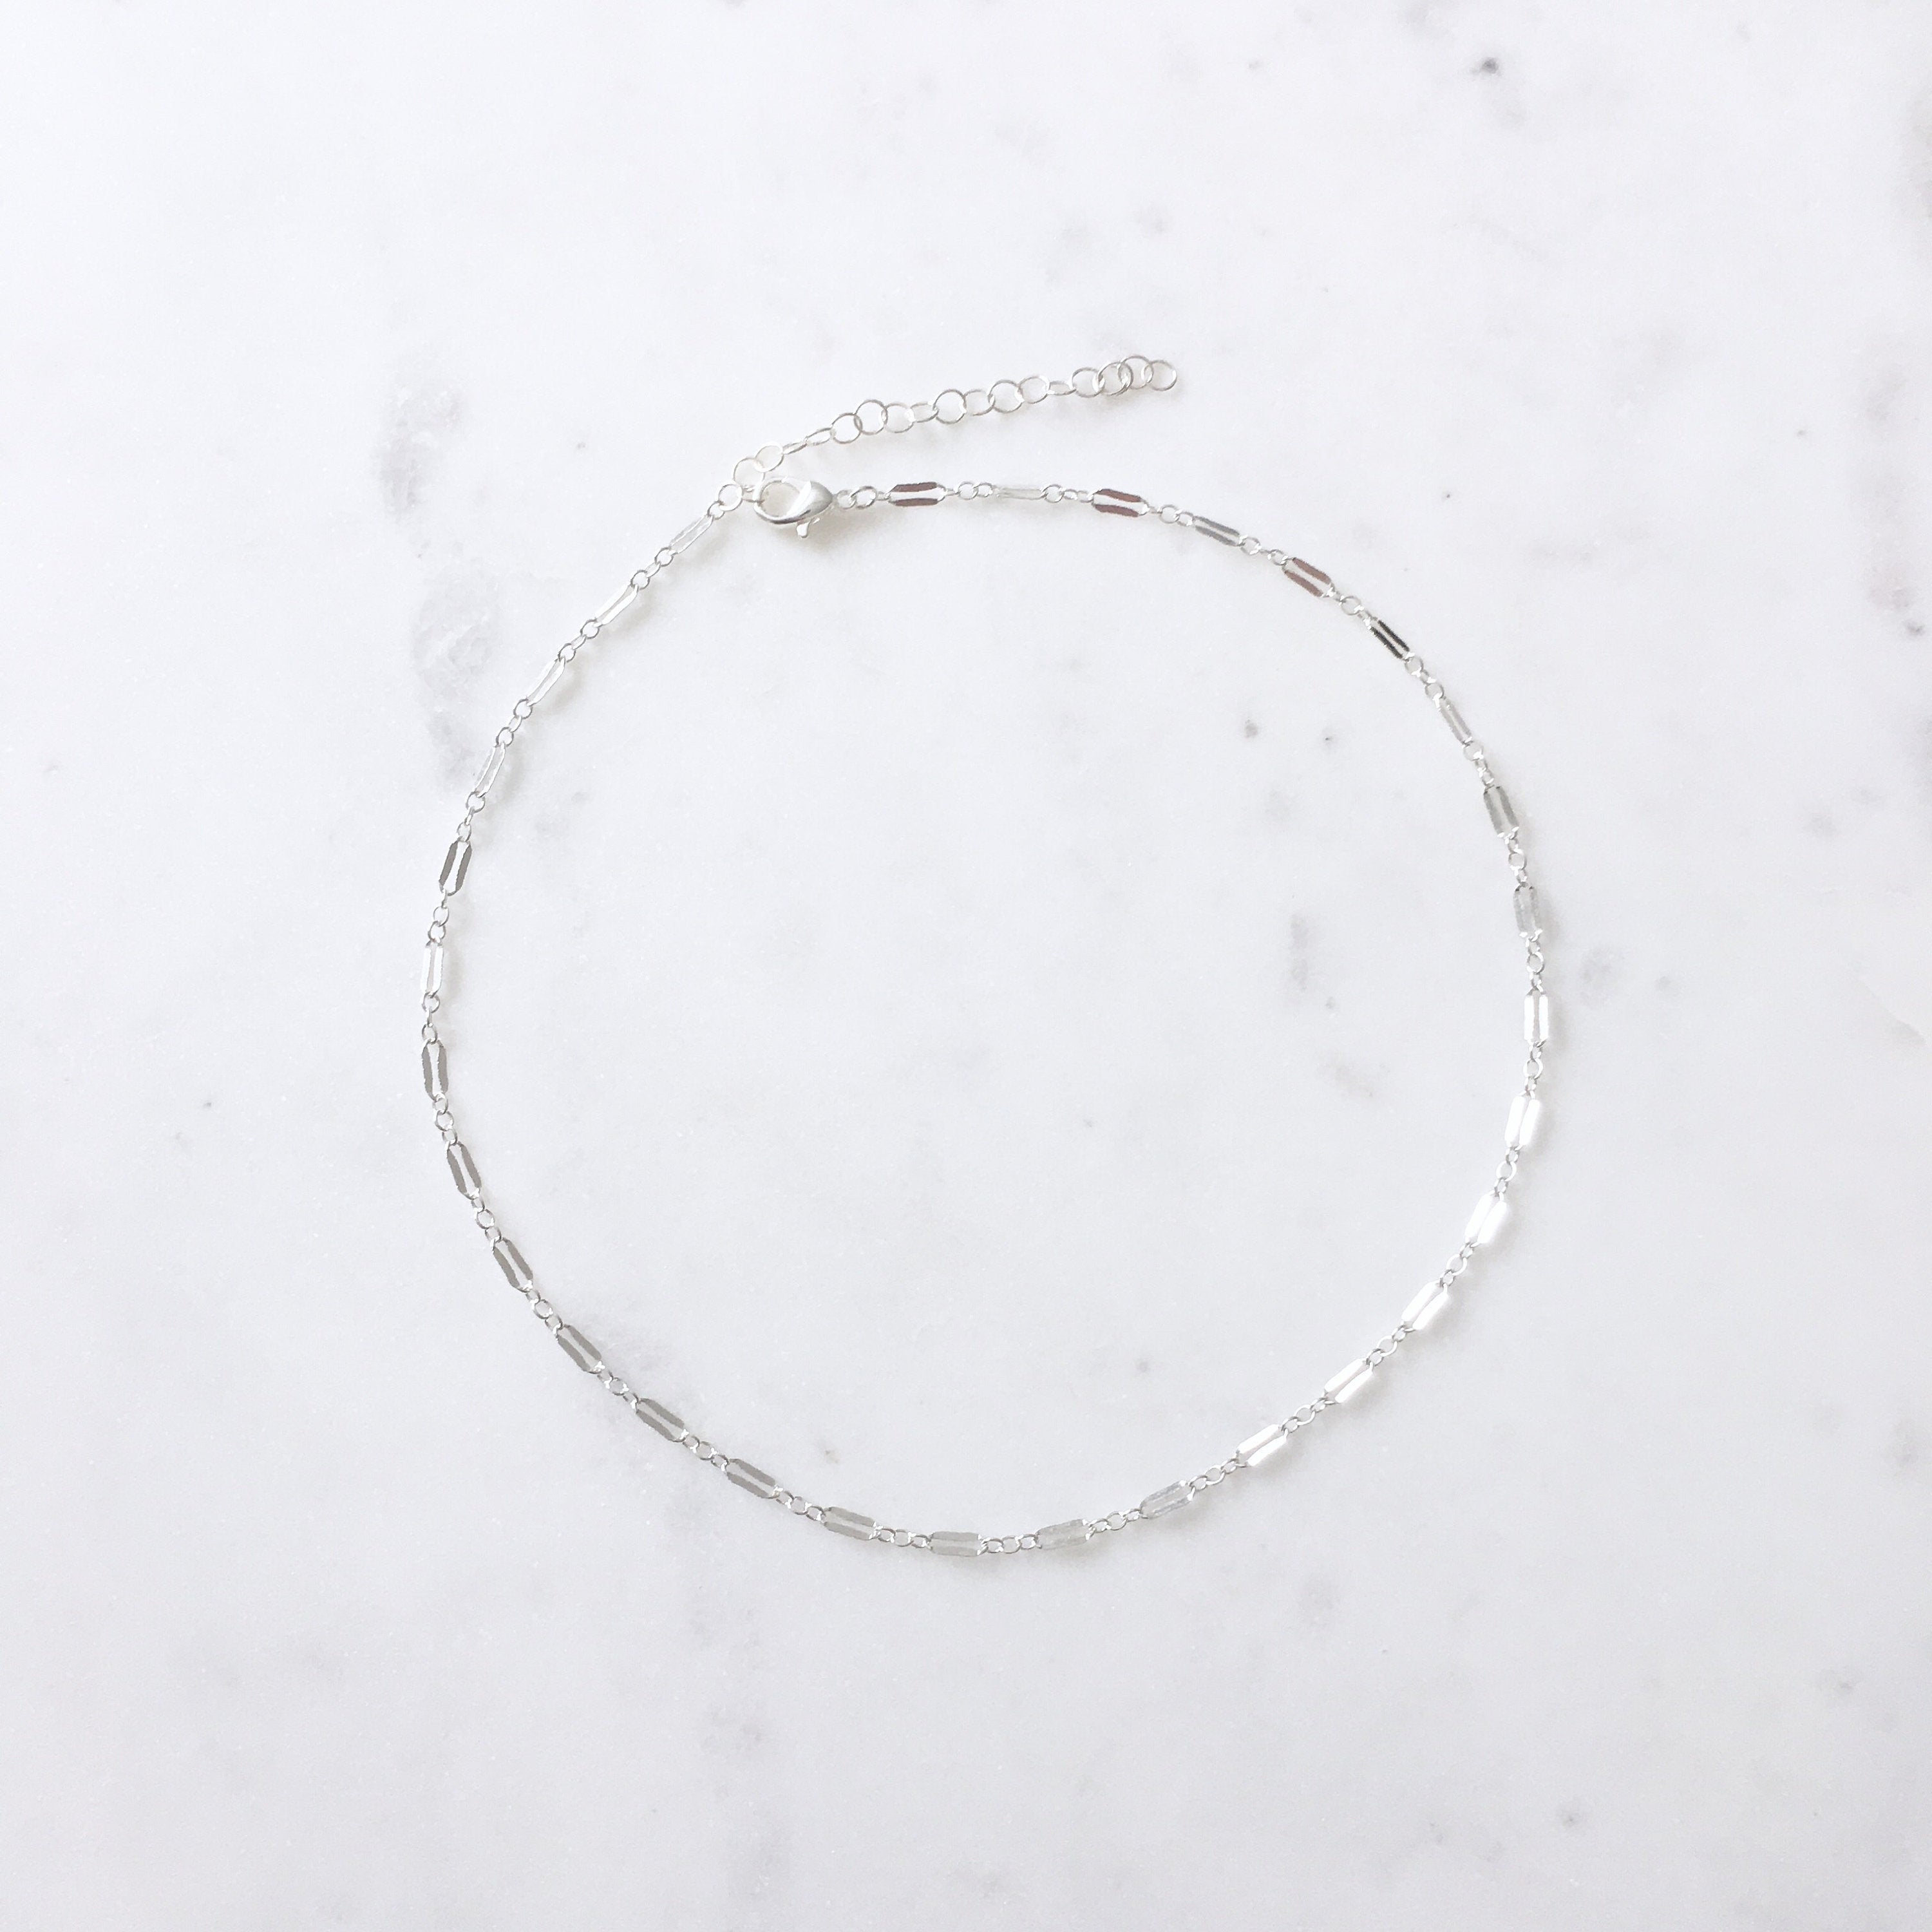 Sterling Silver Sparkly Choker